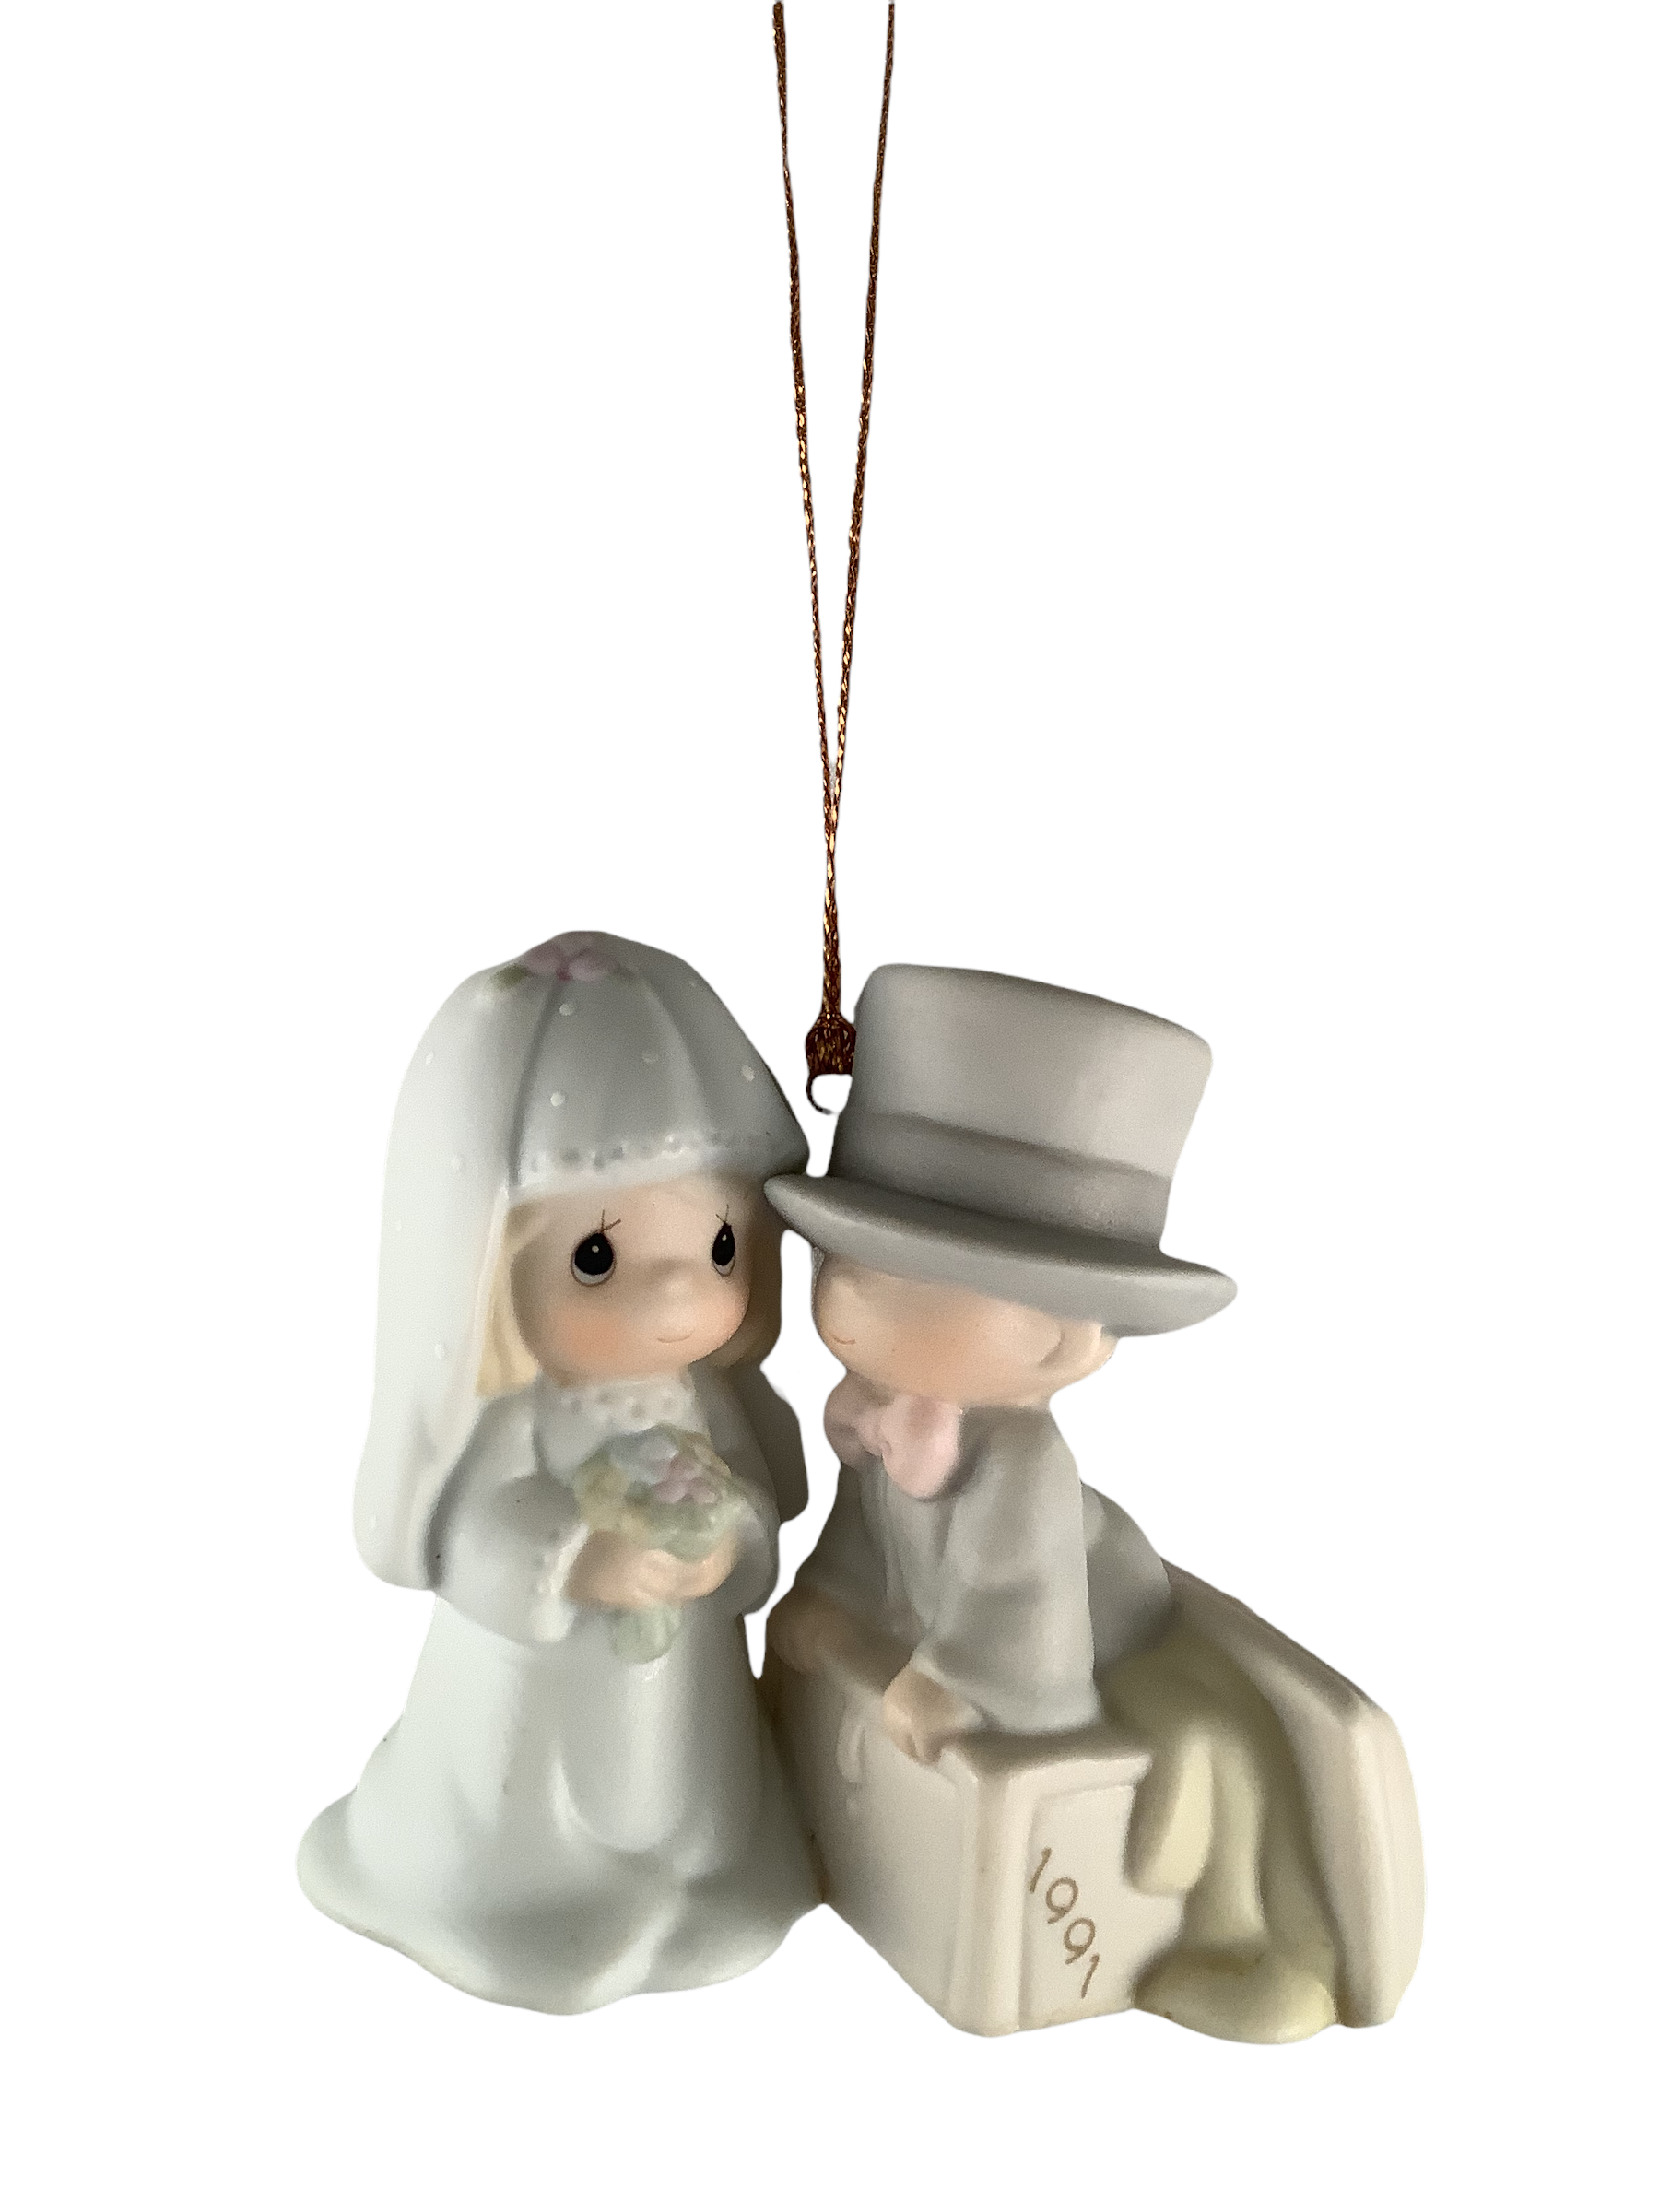 Our First Christmas Together 1991 - Precious Moment Ornament